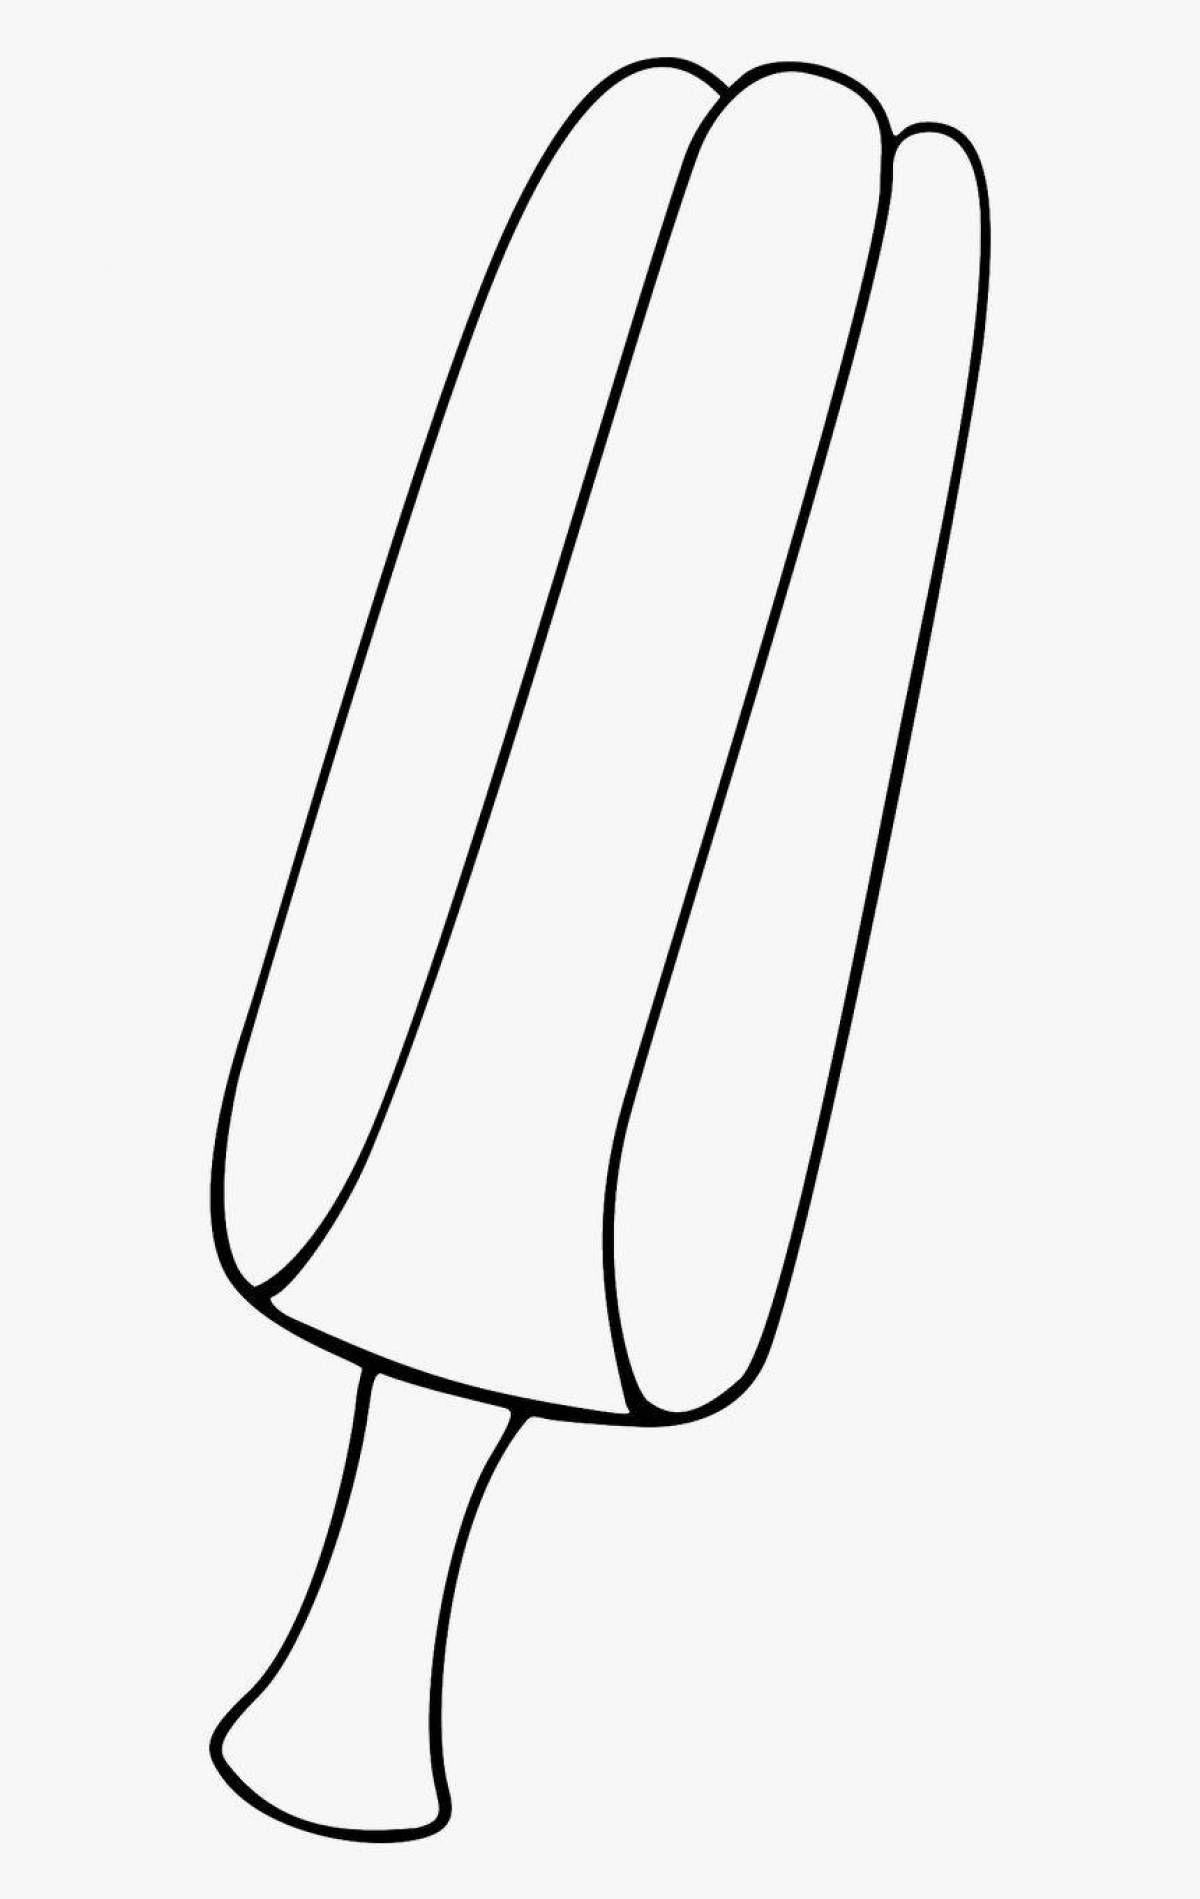 Fun popsicle coloring page